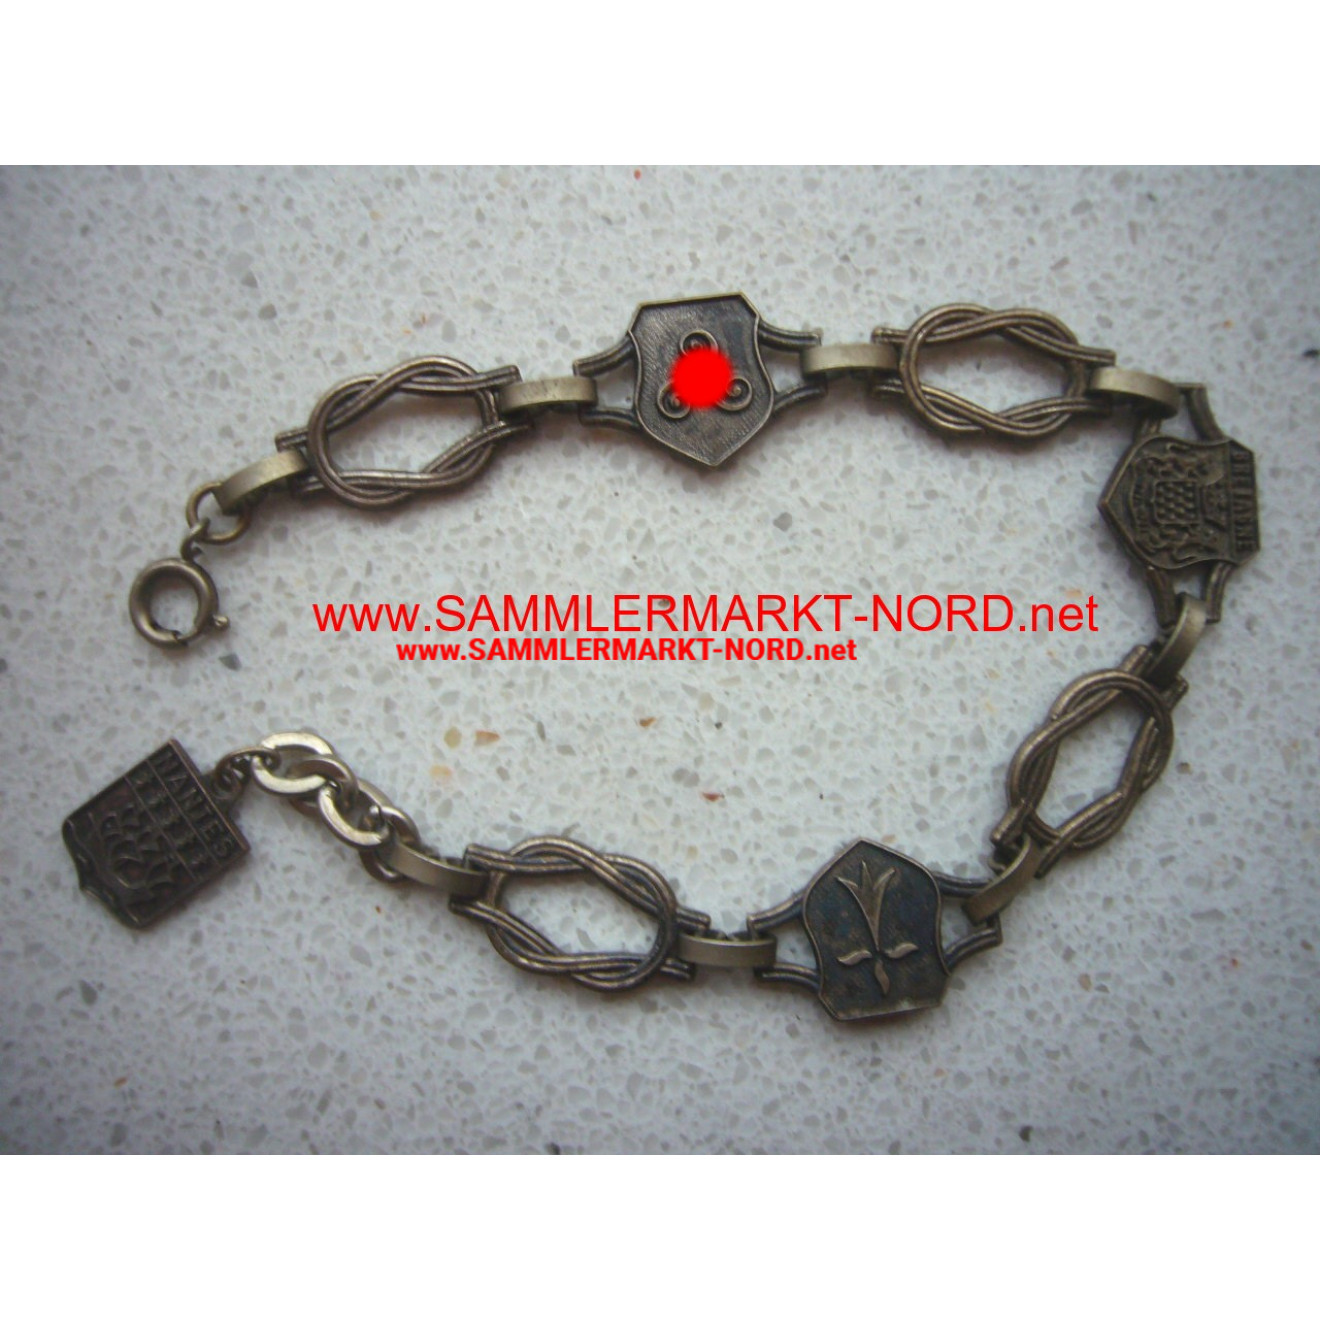 France Brittany - Bracelet with a kind of sun wheel